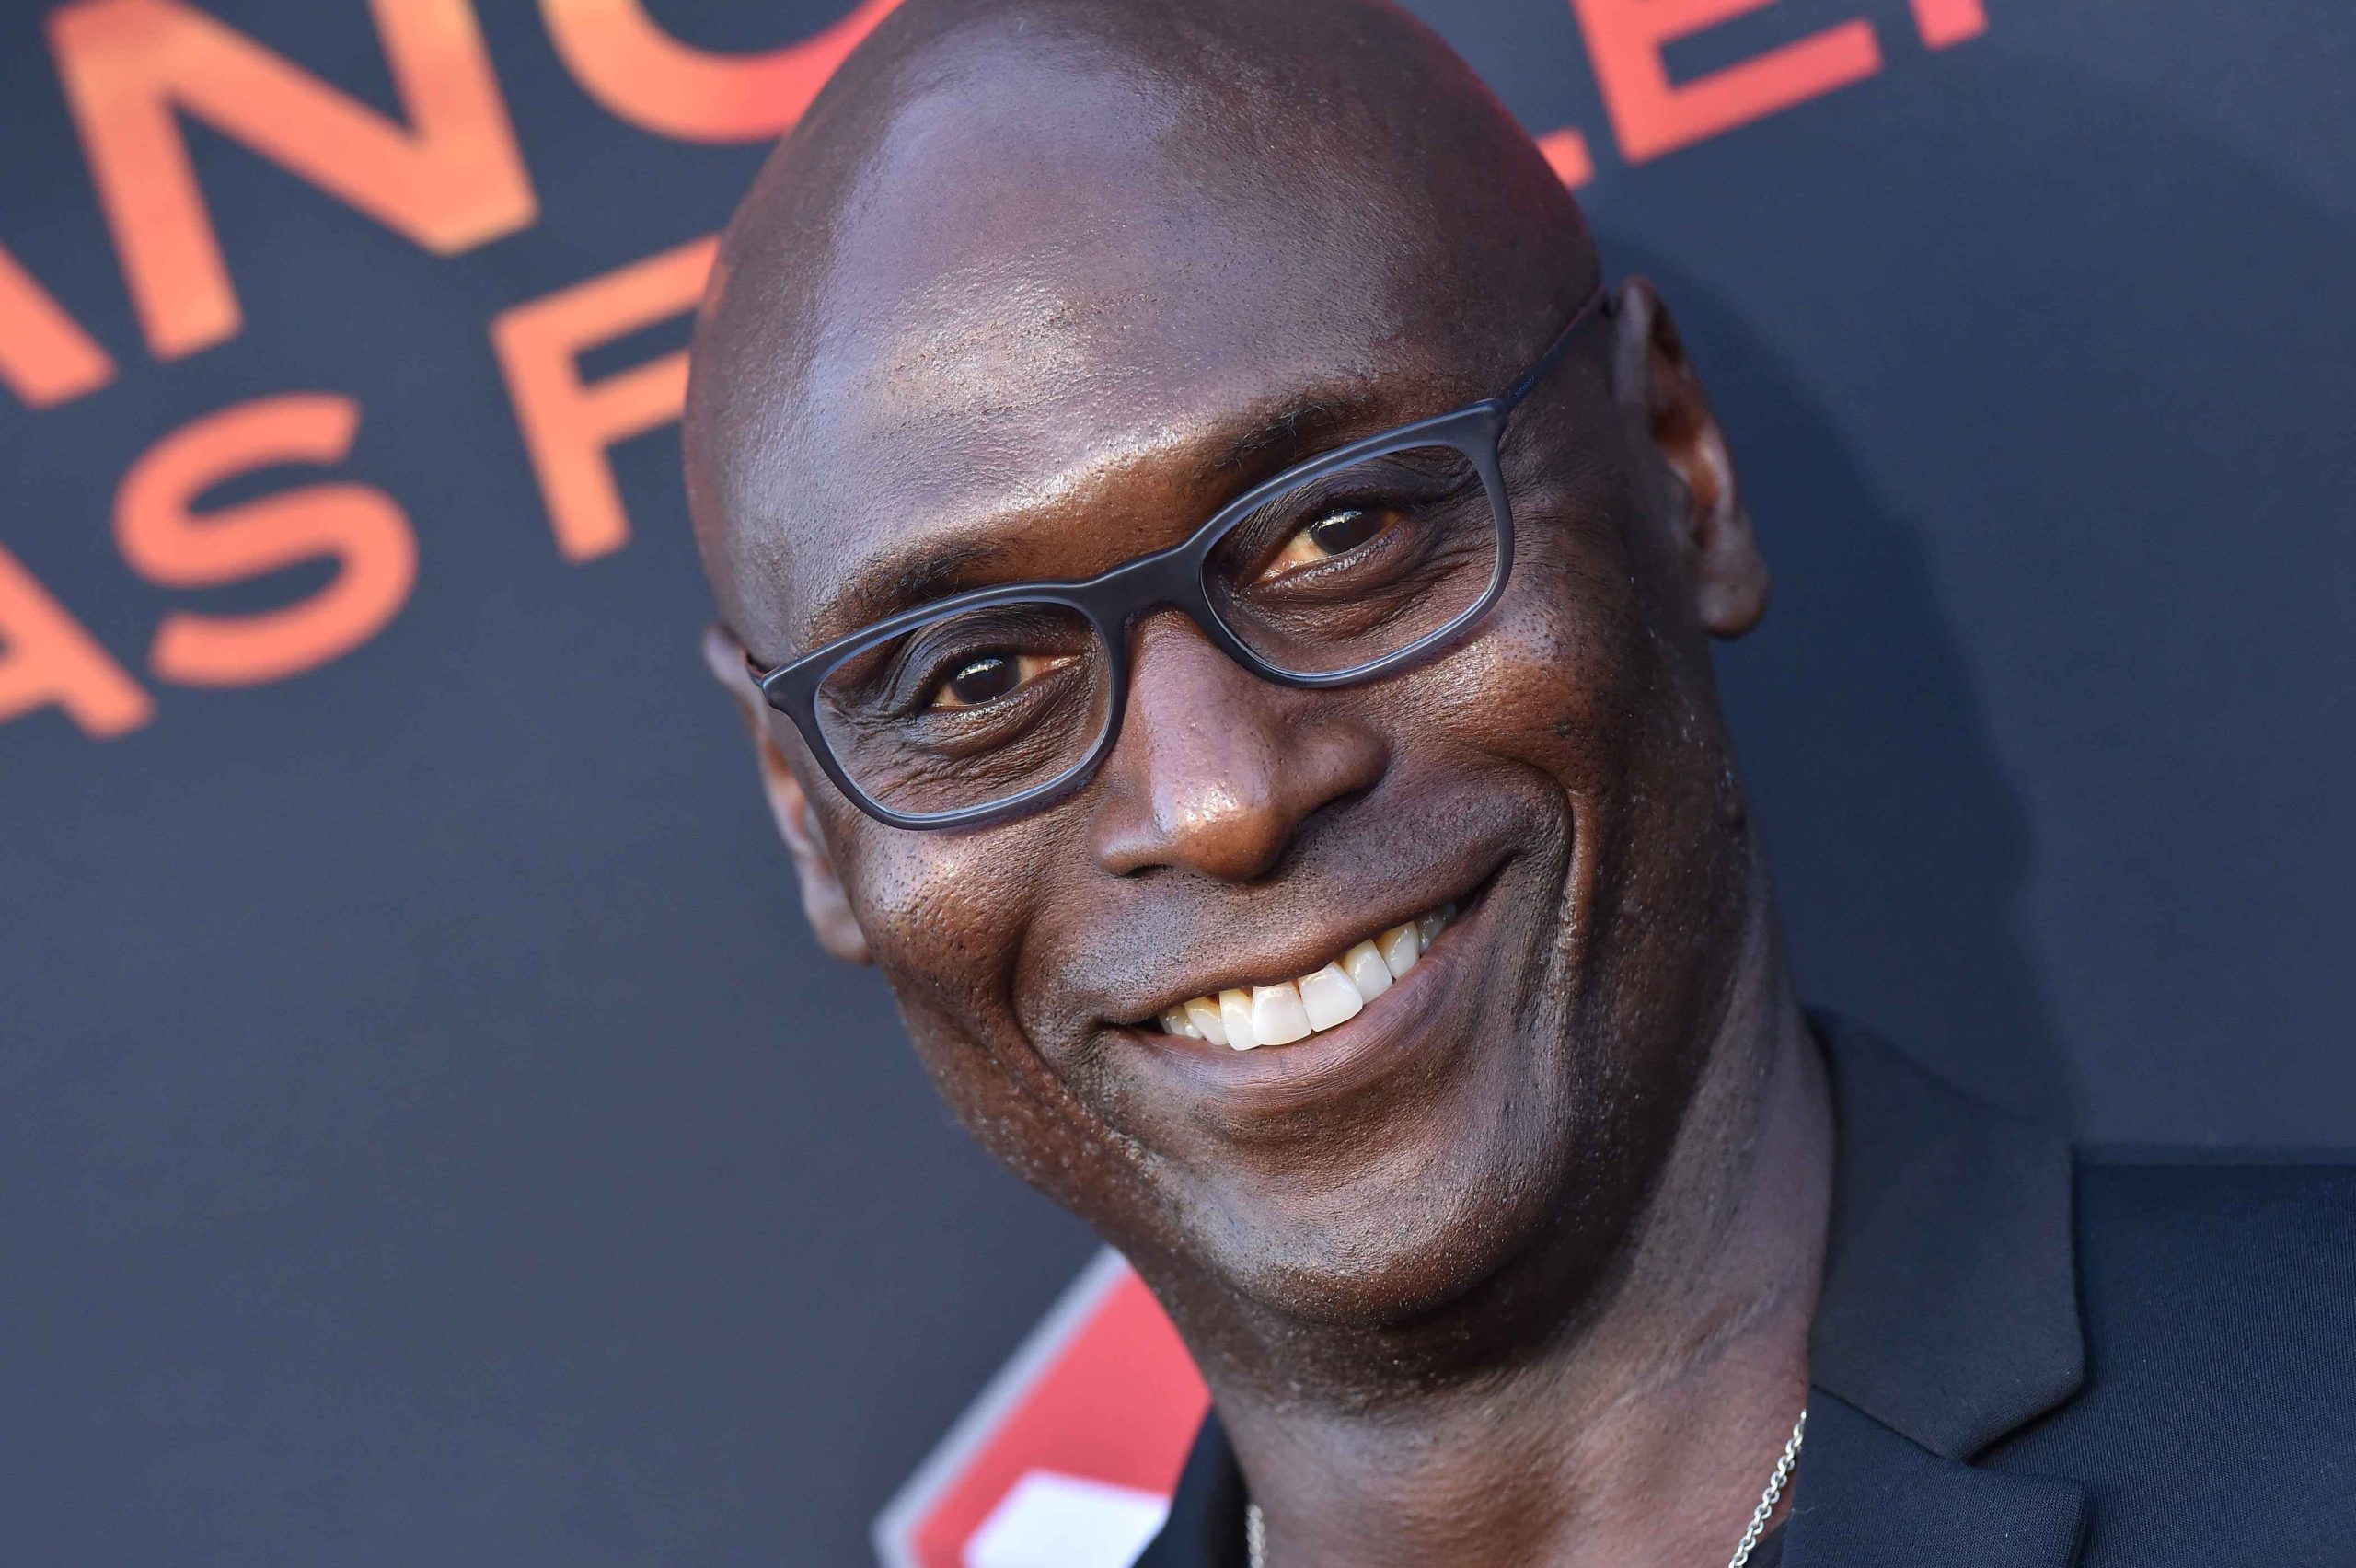 Lance Reddick Cause of Death, Age, Parents, Siblings, Wife